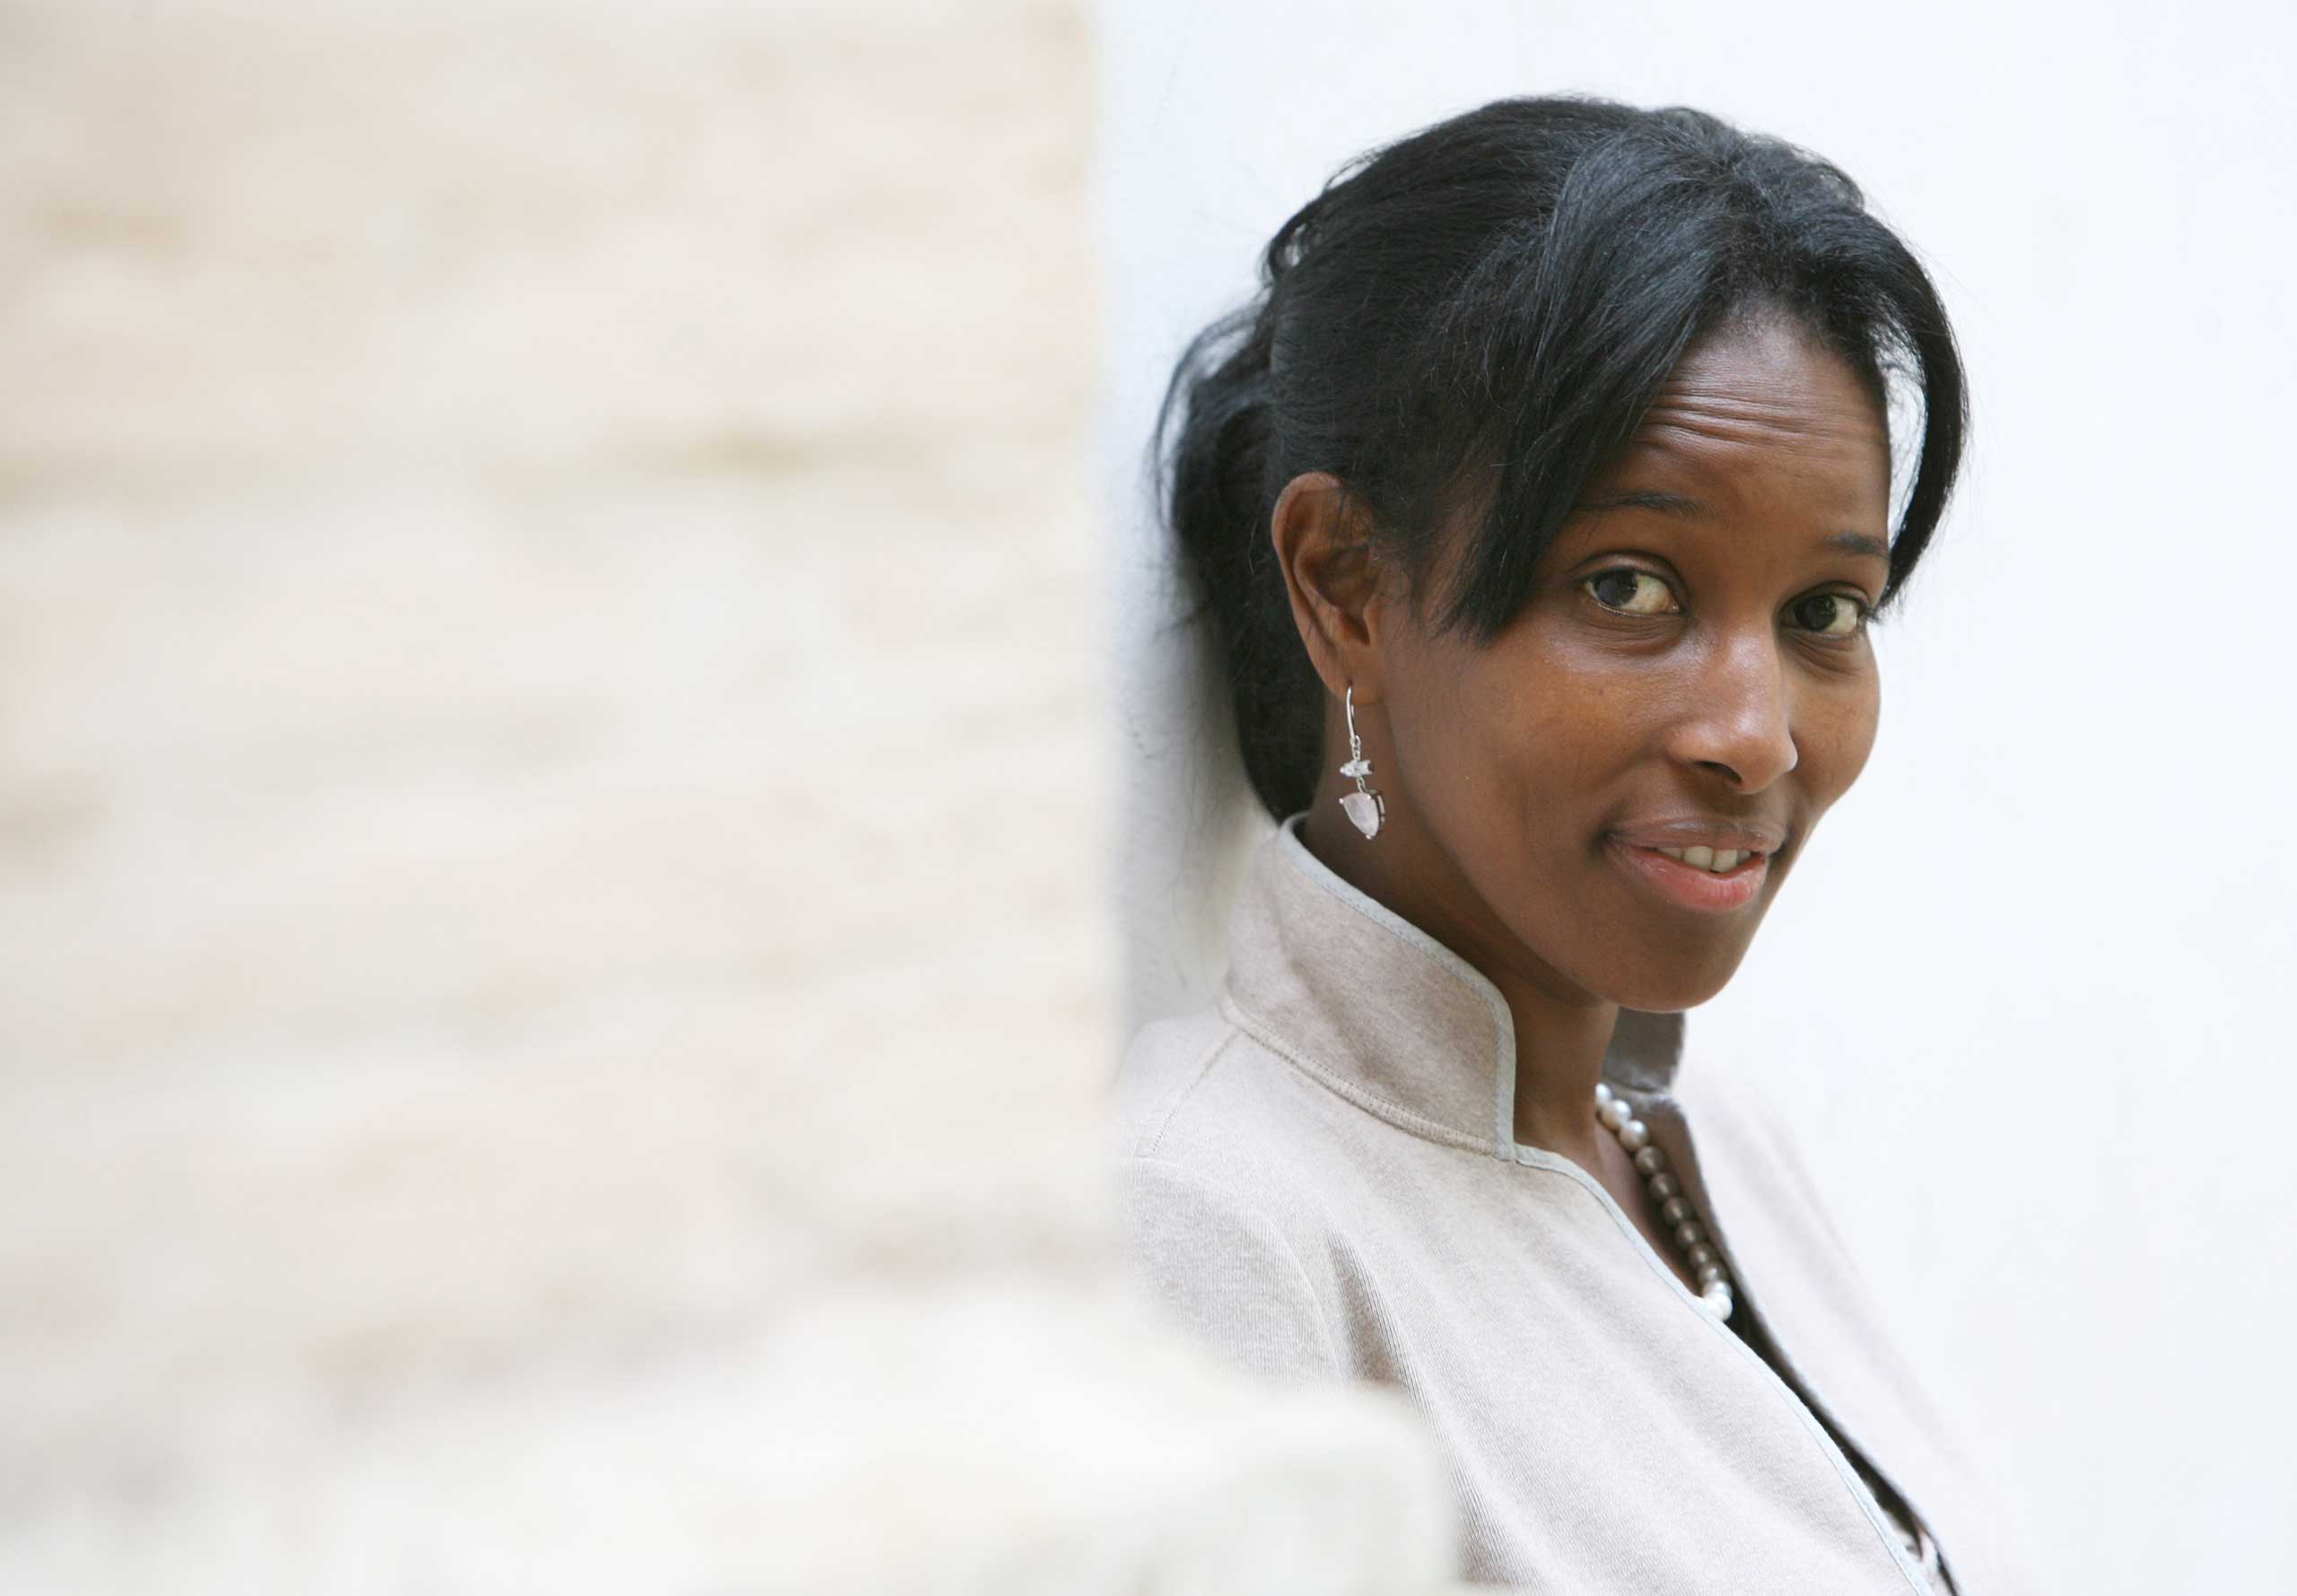 Somalian author Ayaan Hirsi Ali, former member of the Dutch parliament, in Rome in 2008. (Elisabetta Villa—Getty Images)